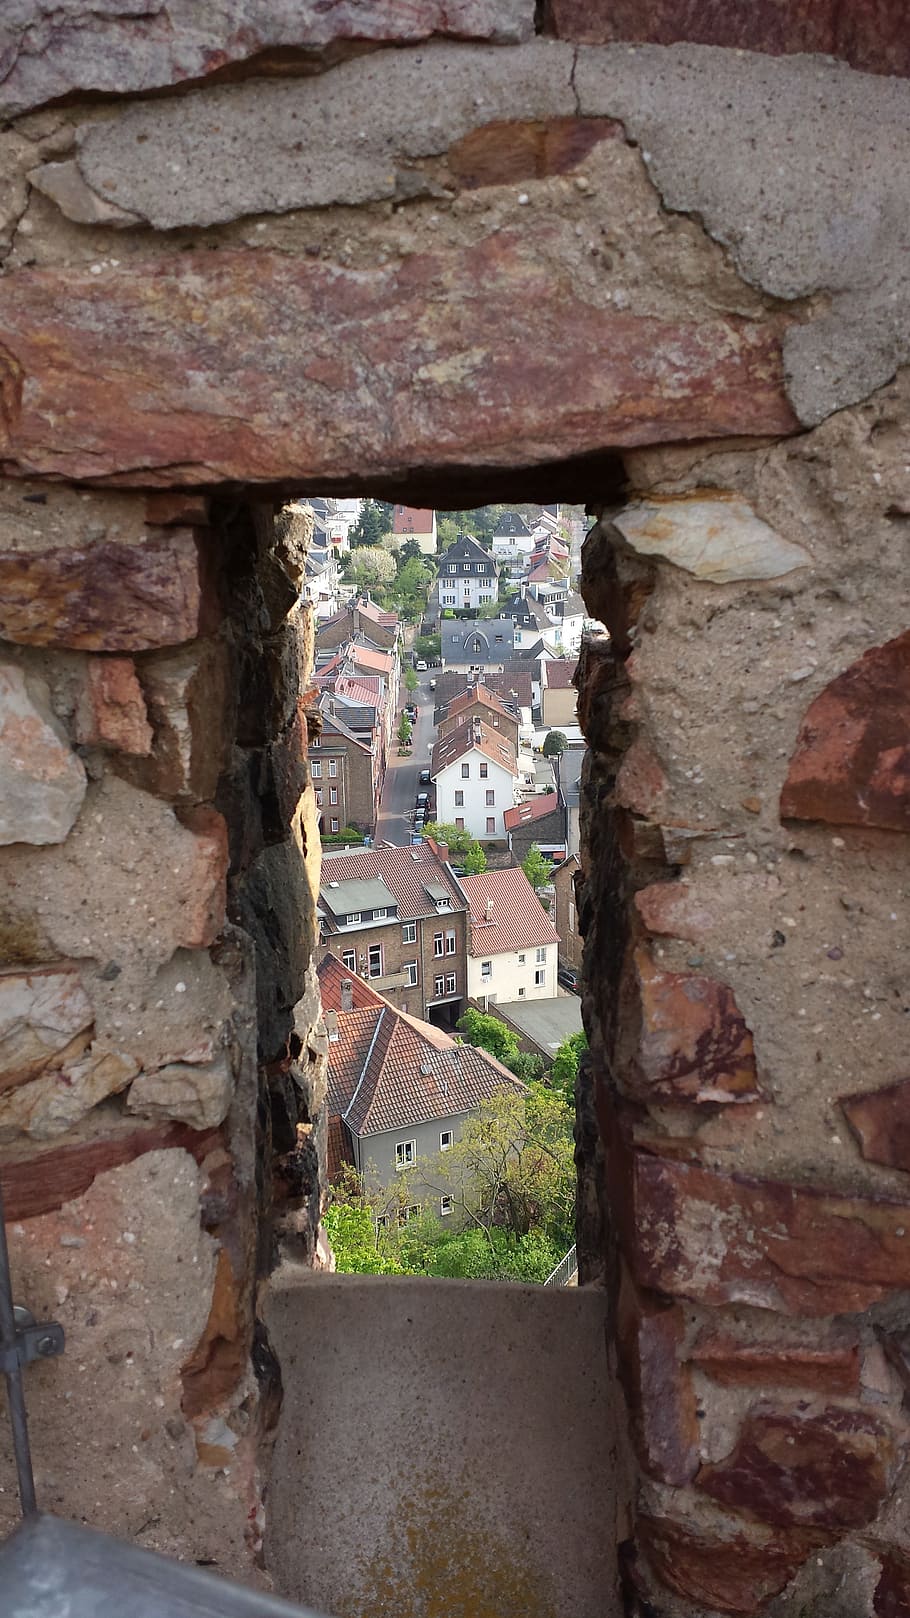 castle windows, embrasure, gathered, outlook, by looking, city